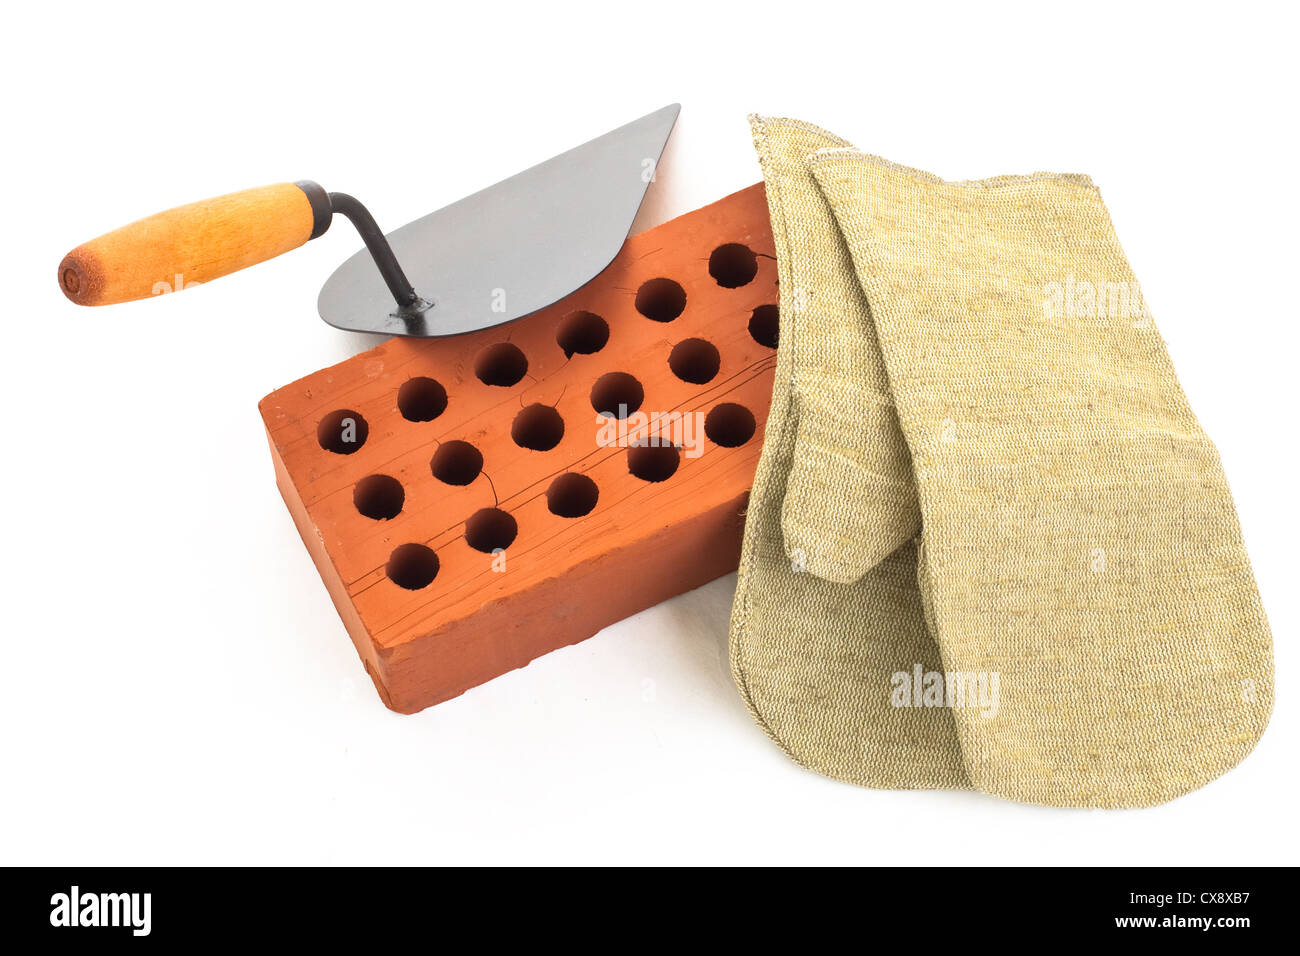 Red perforated ceramic brick, trowel and gauntlet isolated on white Stock Photo